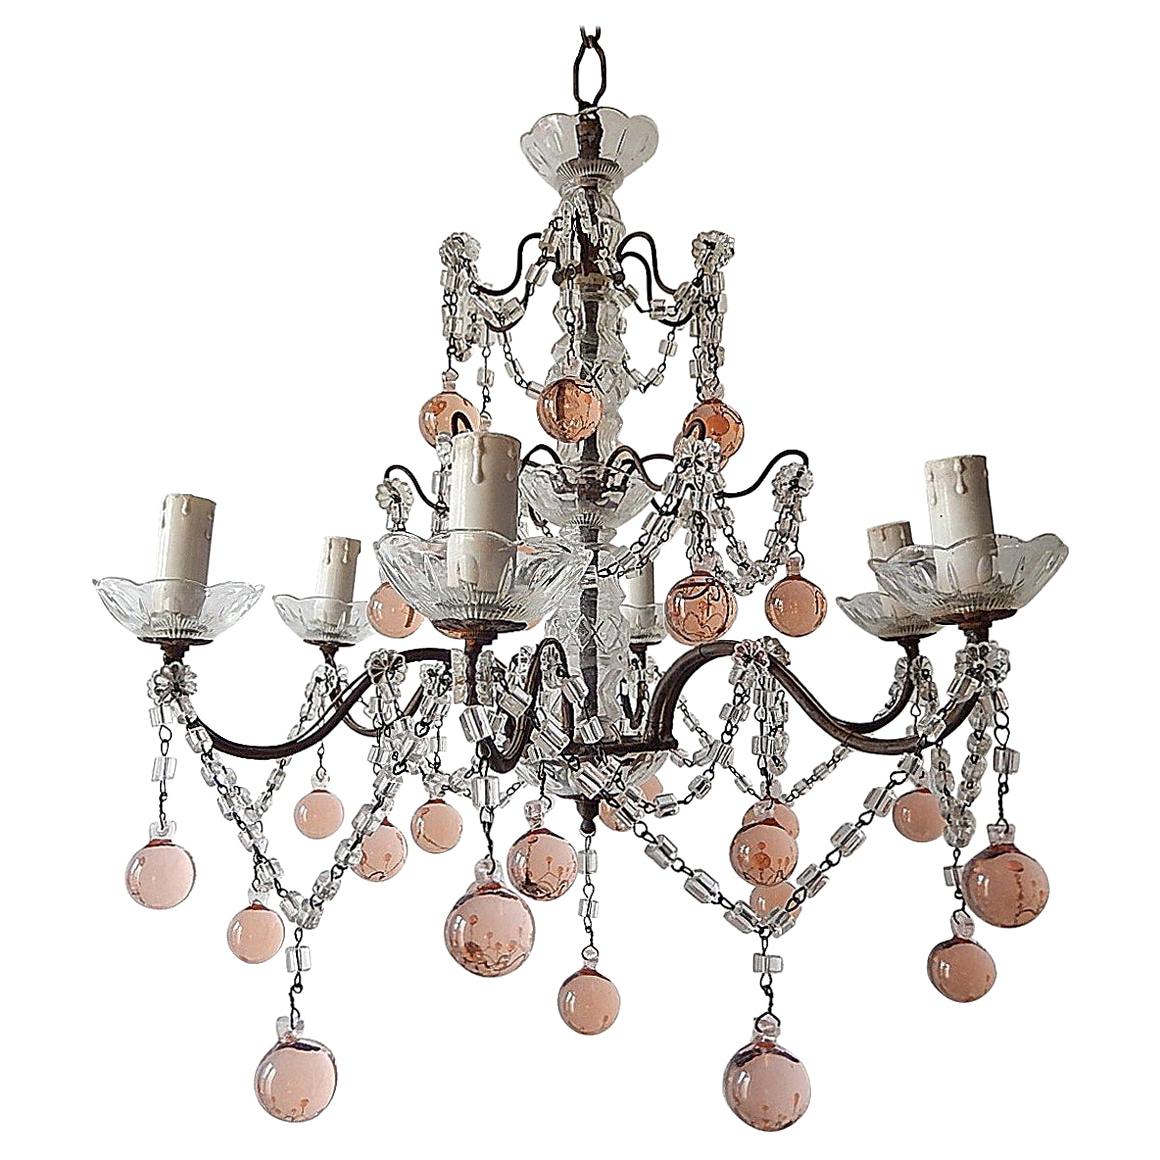 1920 French Pink Murano Balls Crystal Swags Chandelier